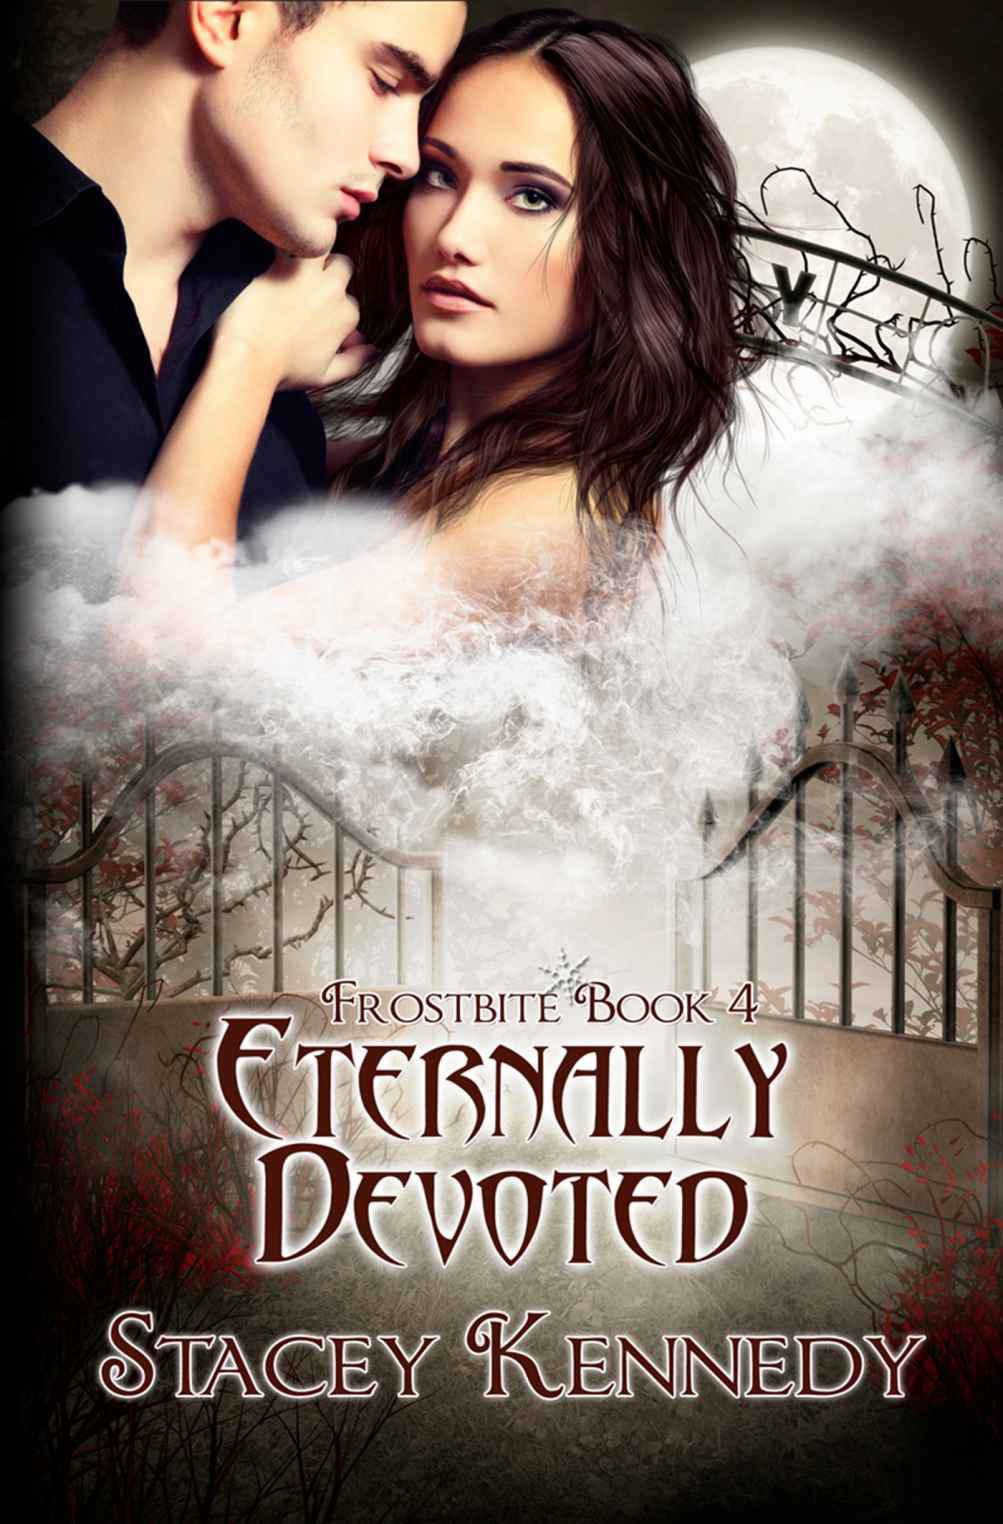 Eternally Devoted (Frostbite #4) (2013) by Stacey Kennedy